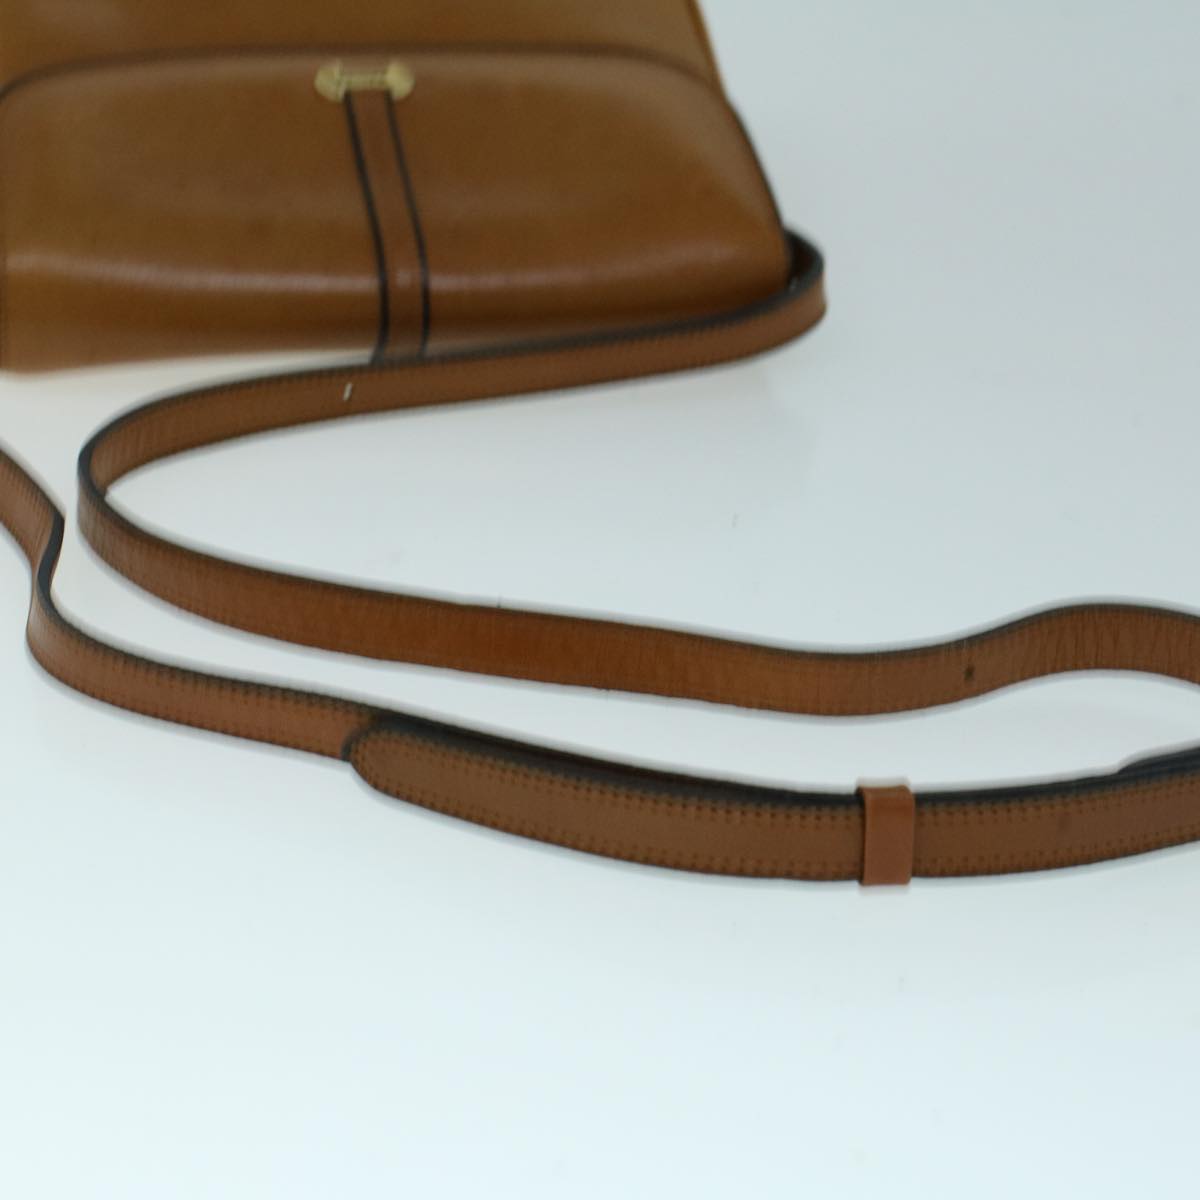 BALLY Shoulder Bag Leather Brown Auth ac2272